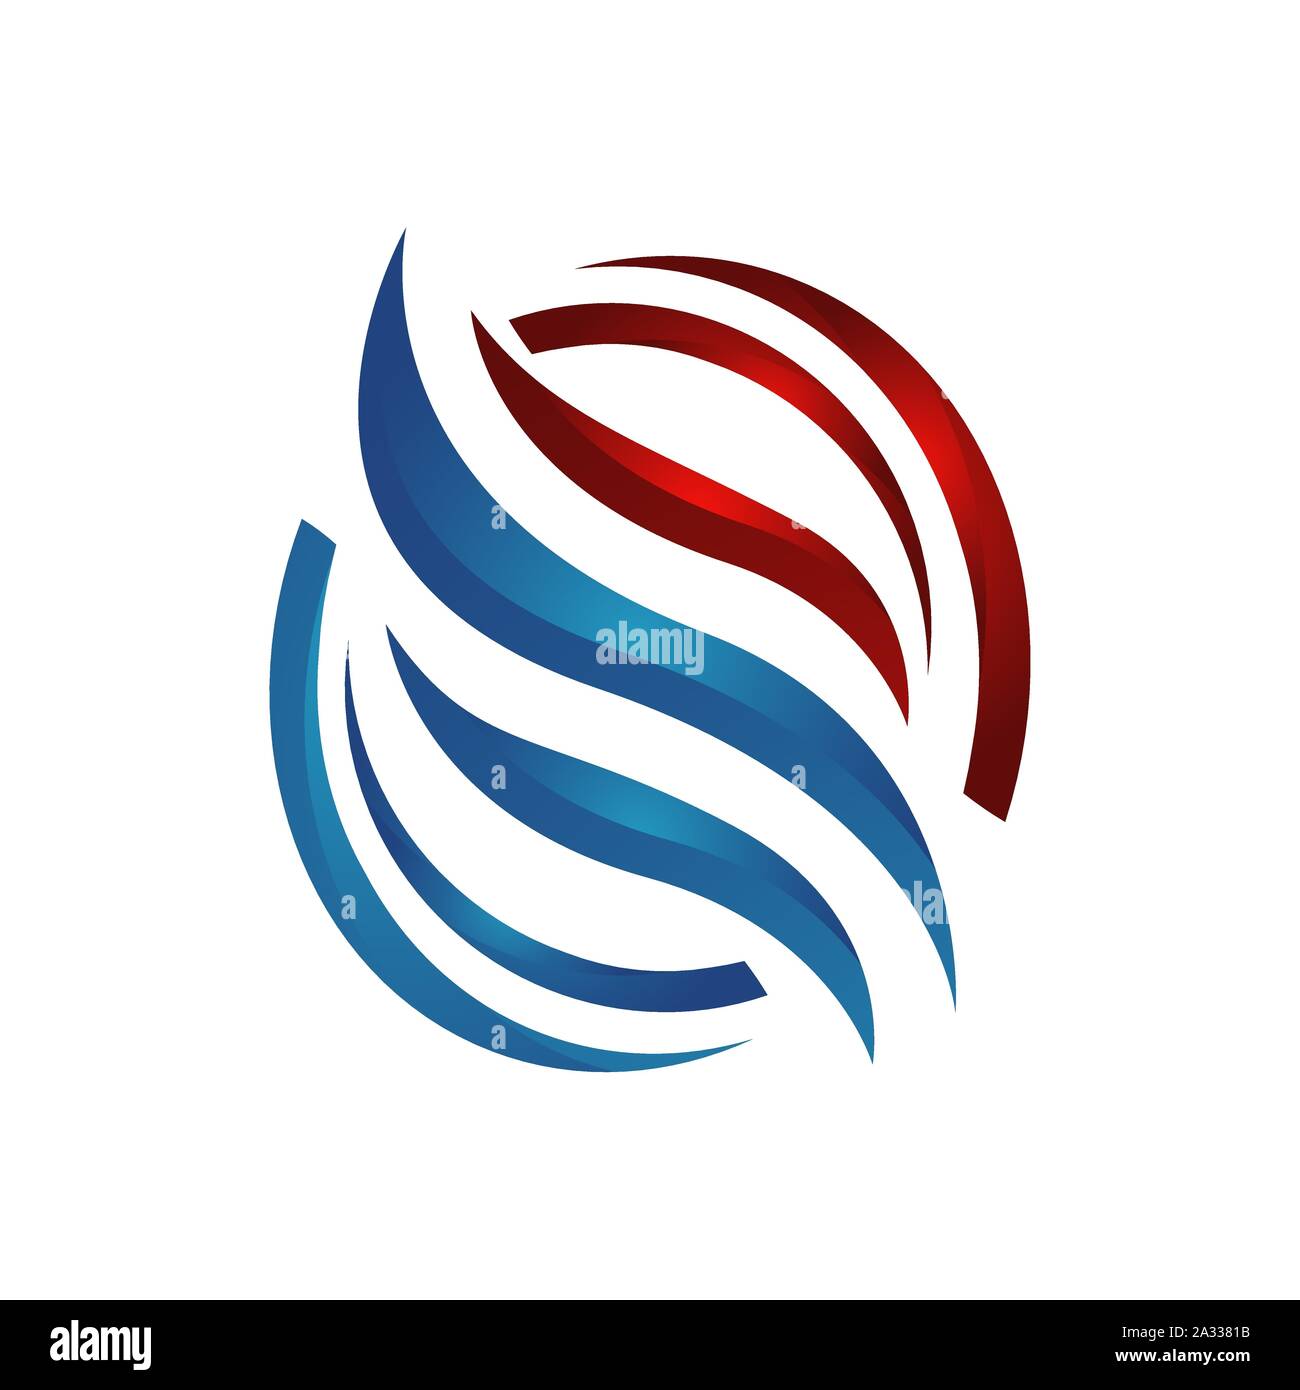 abstract heating and cooling hvac logo design vector business company Stock Vector